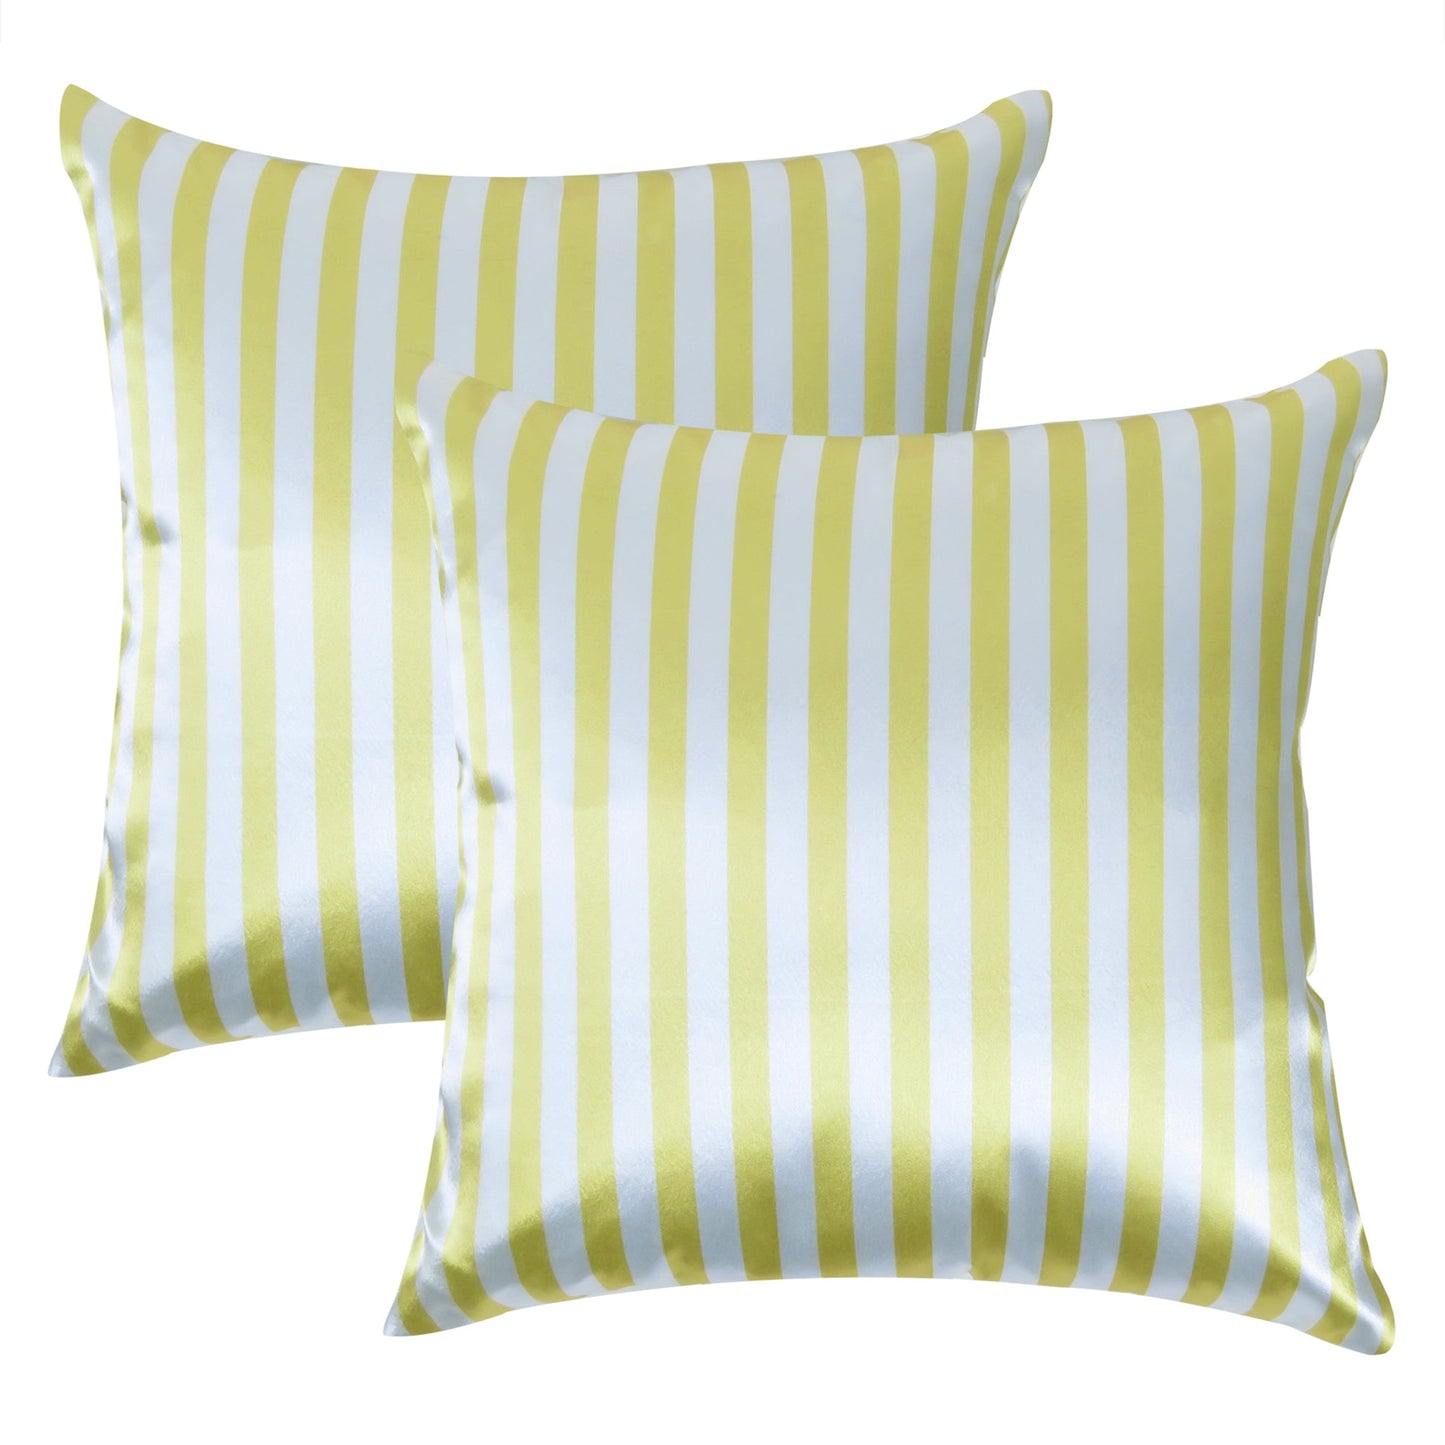 Cream Gold Silky Striped Satin Silk Cushion Covers in Set of 2